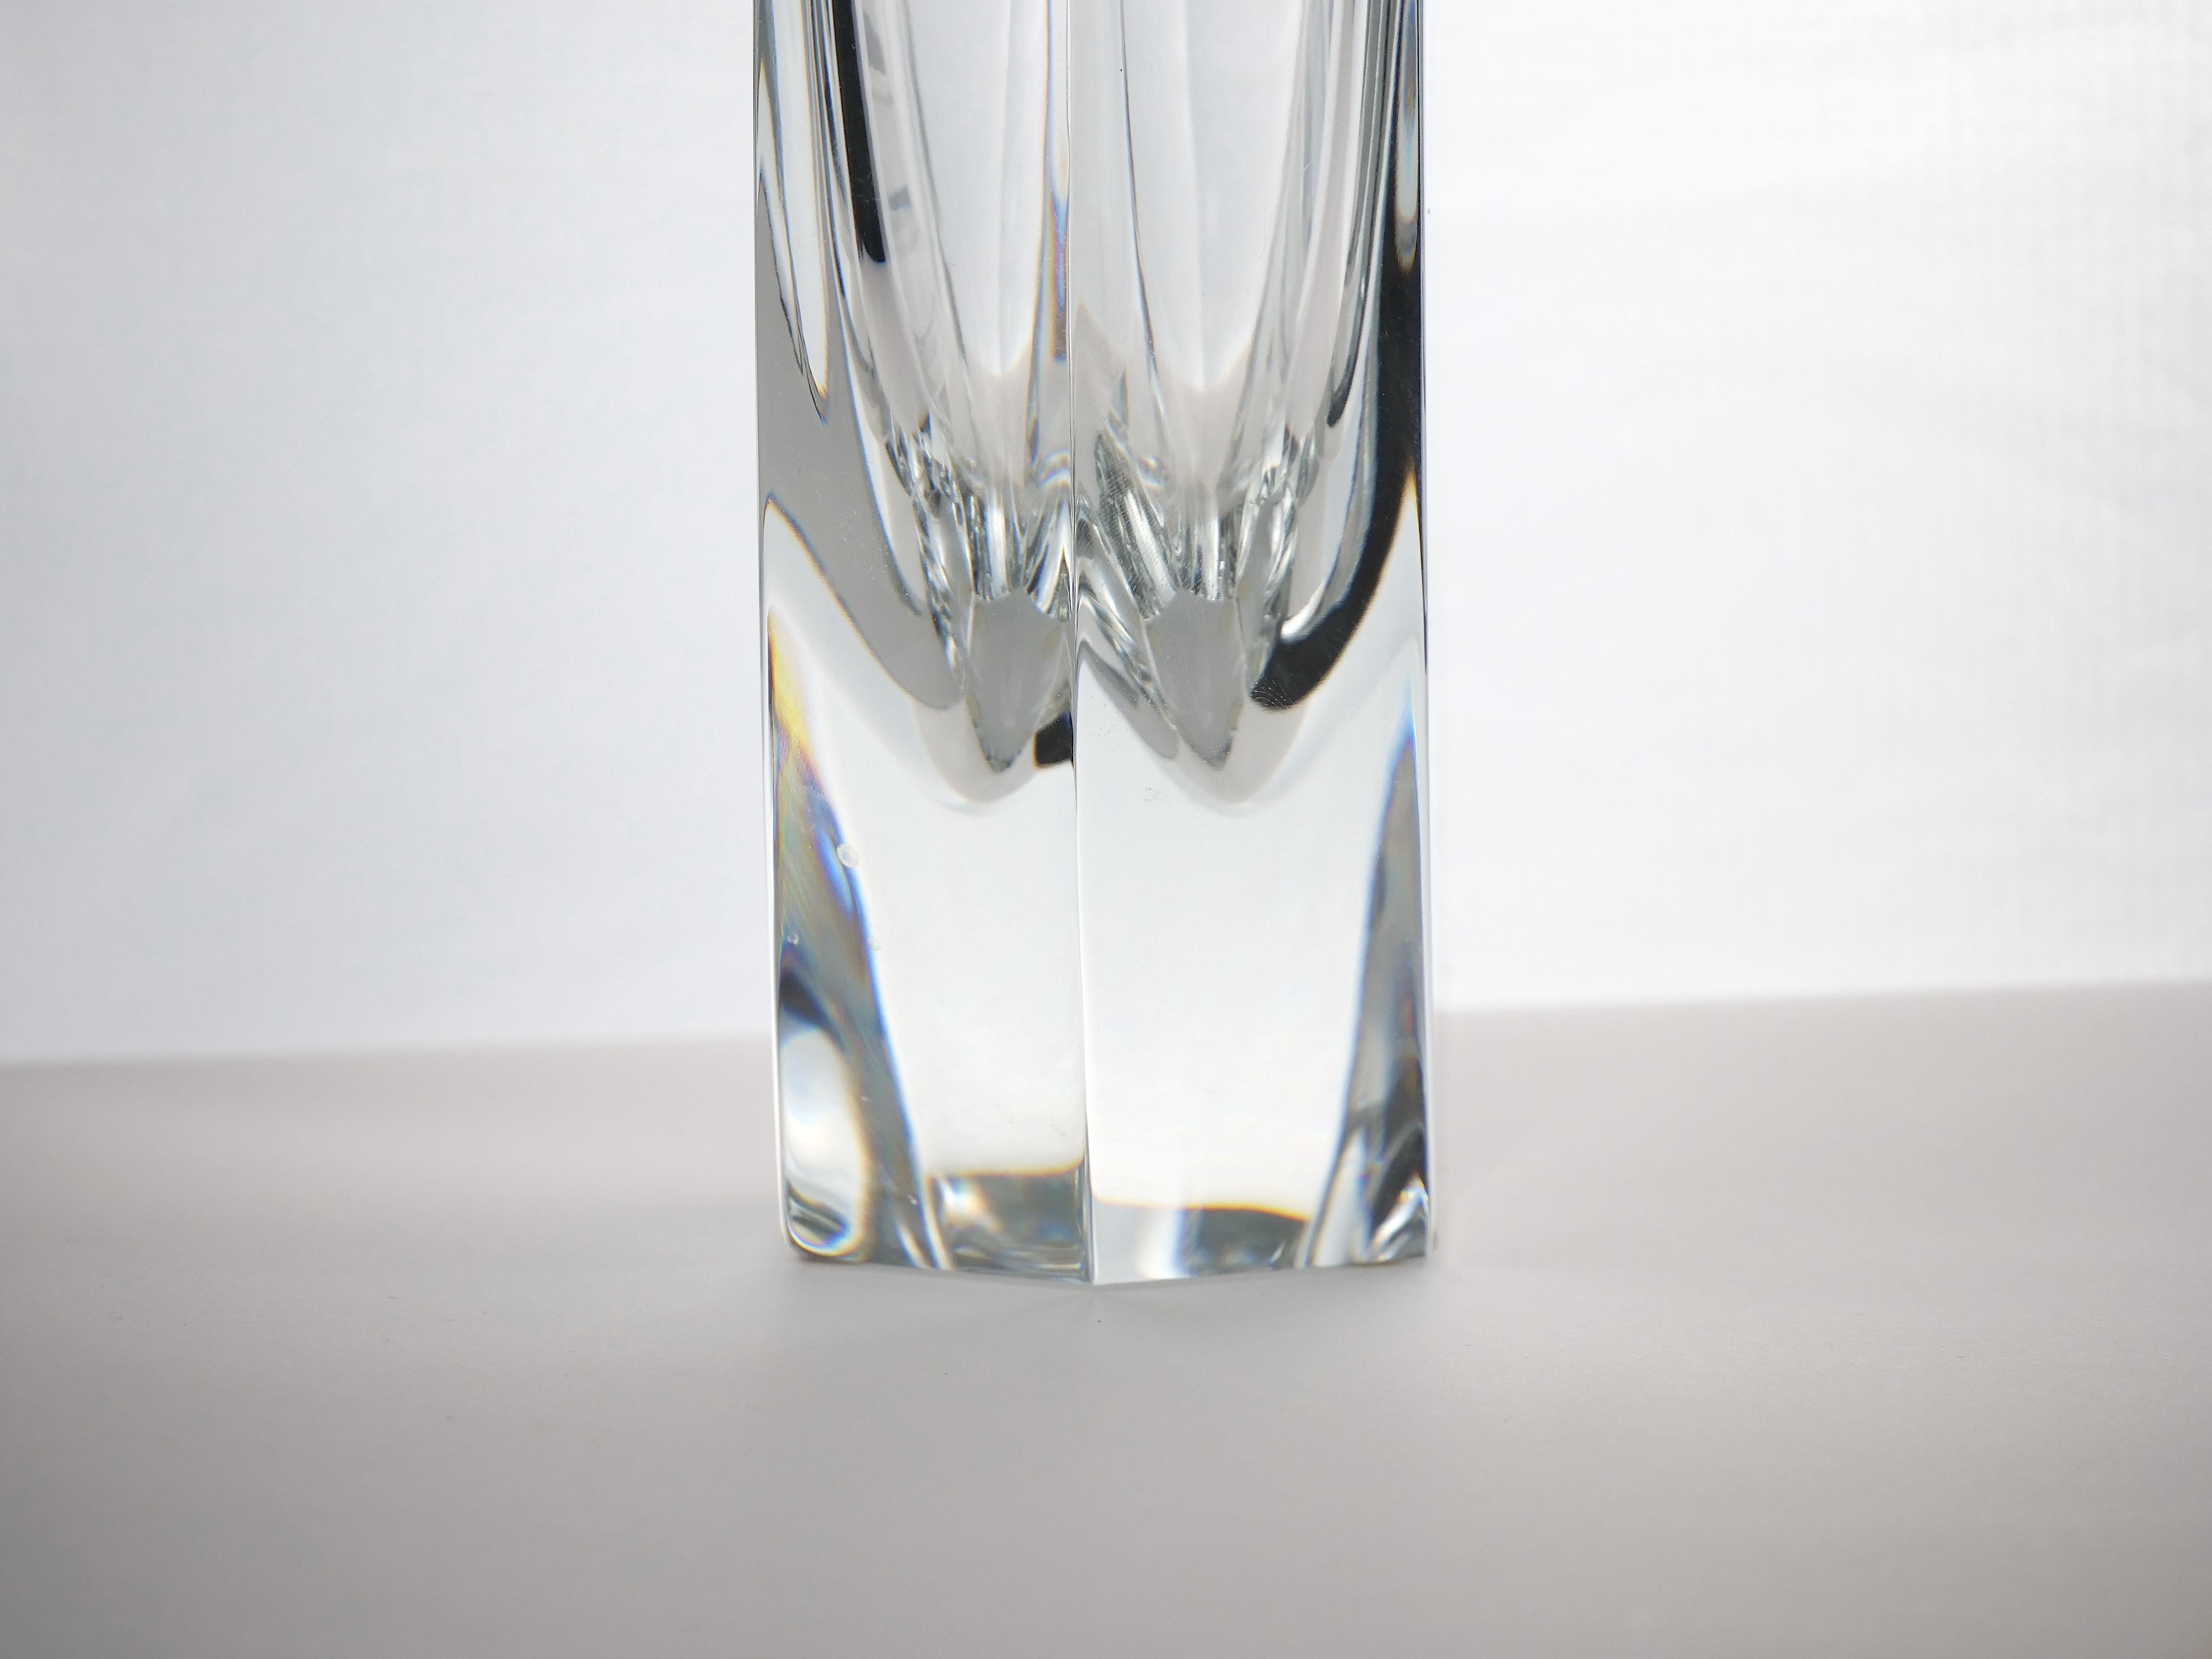 French Baccarat Crystal Art Deco Style Decorative Vase For Sale 4